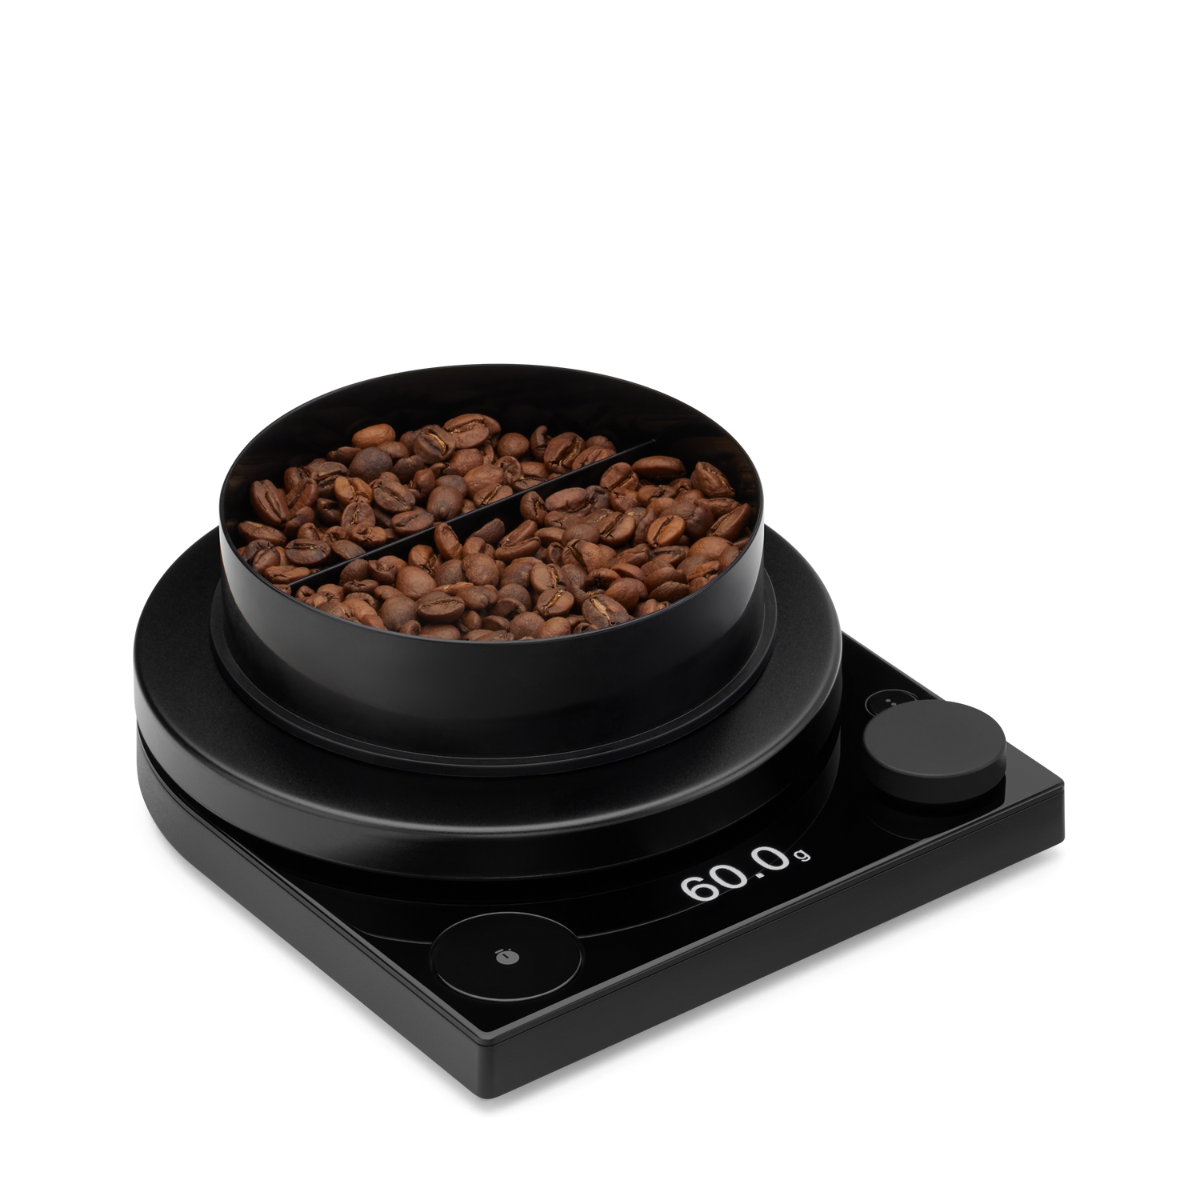 TIMEMORE Exclusive - Black Mirror Basic PRO Coffee Scale with